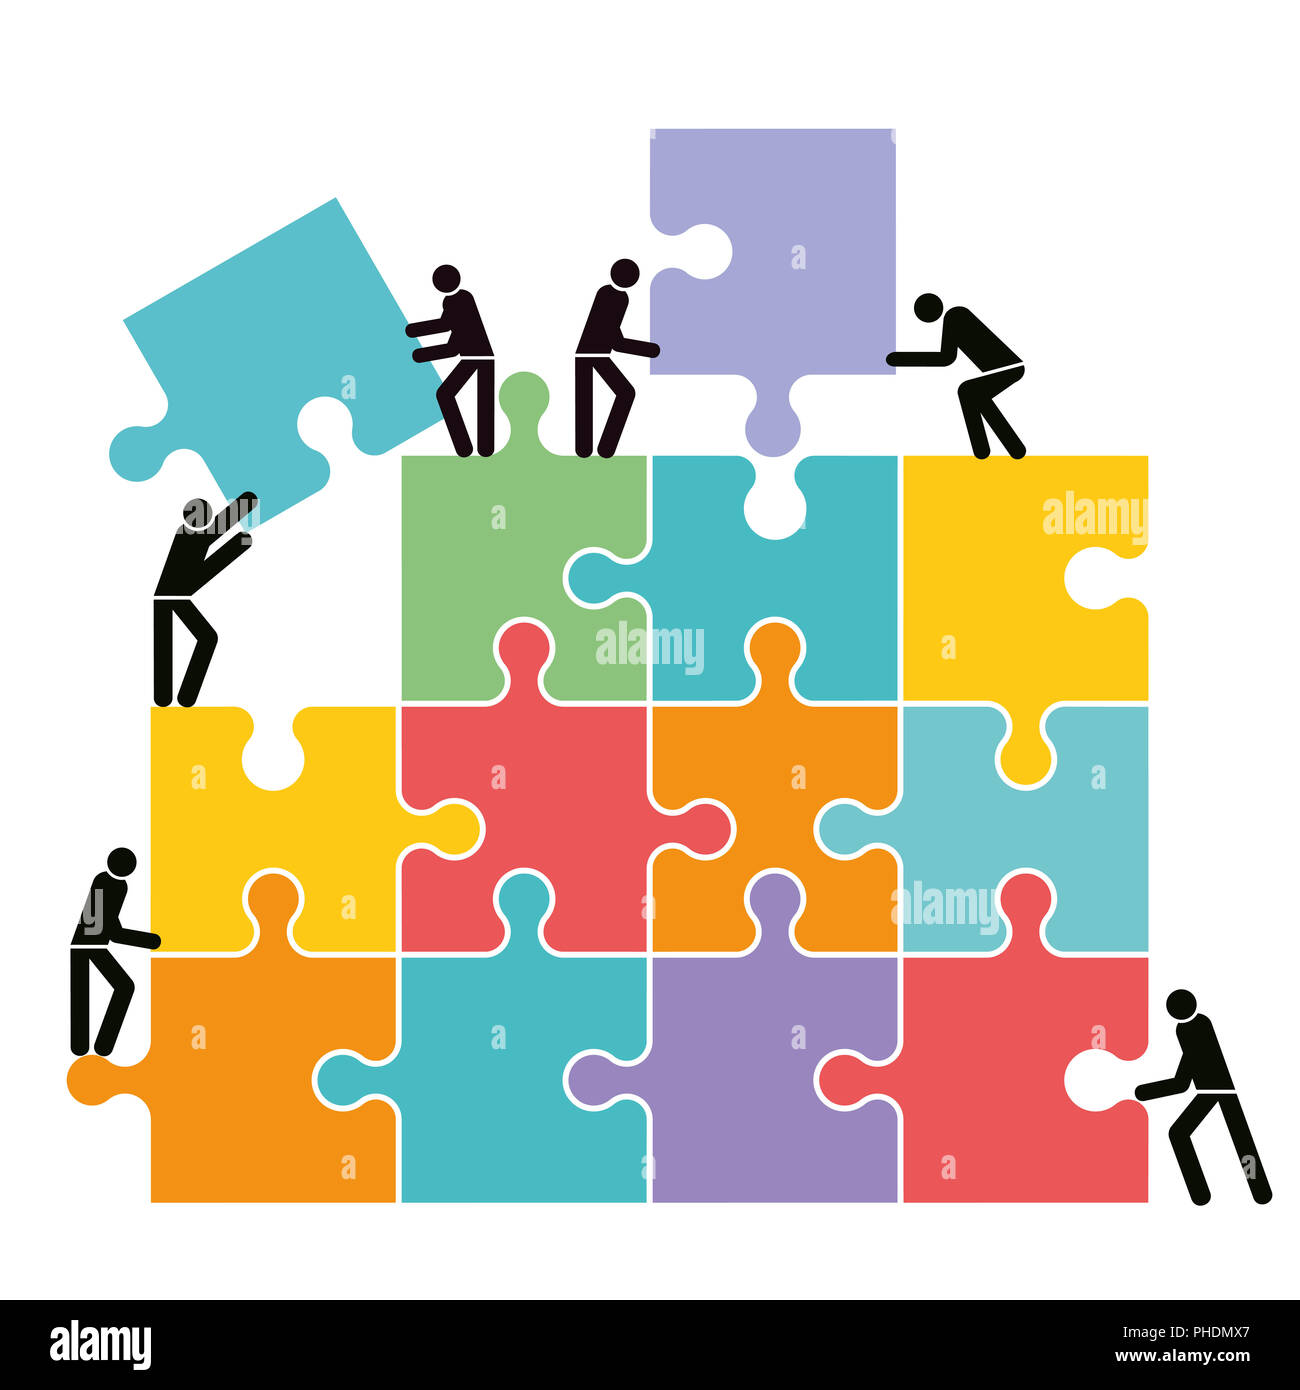 Collaborate and connect, illustration Stock Photo